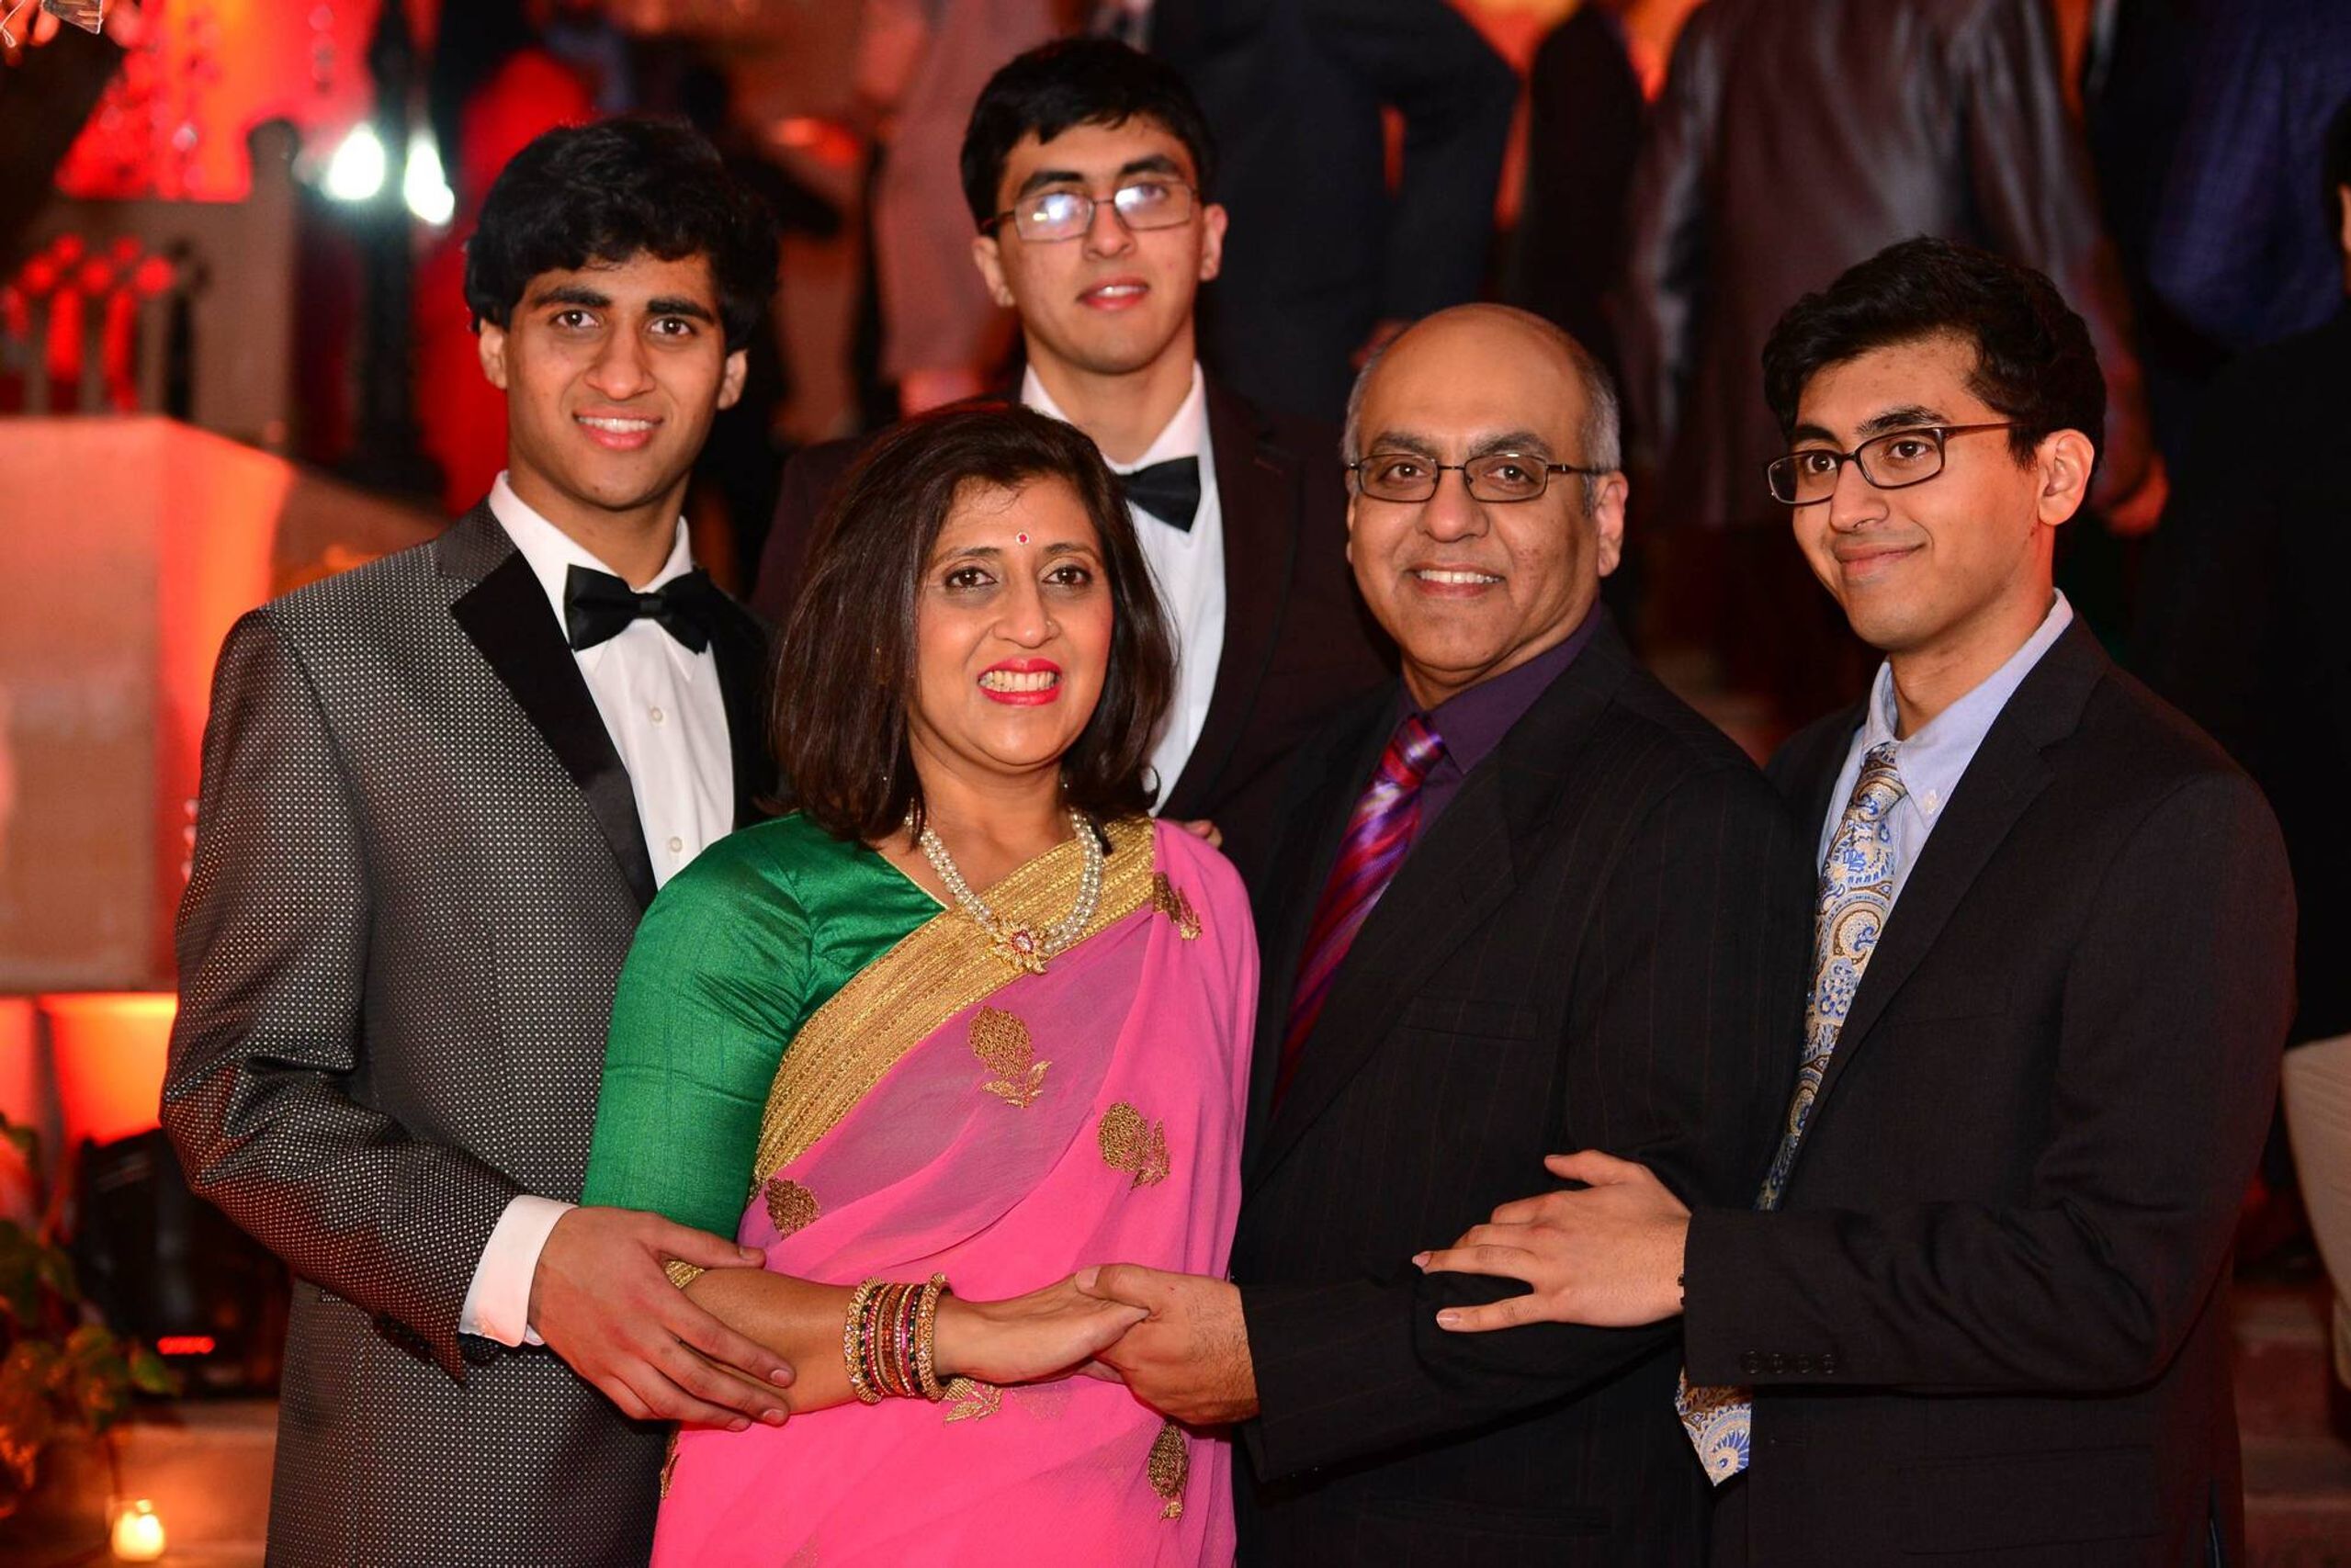 The Aurora family in India in 2015